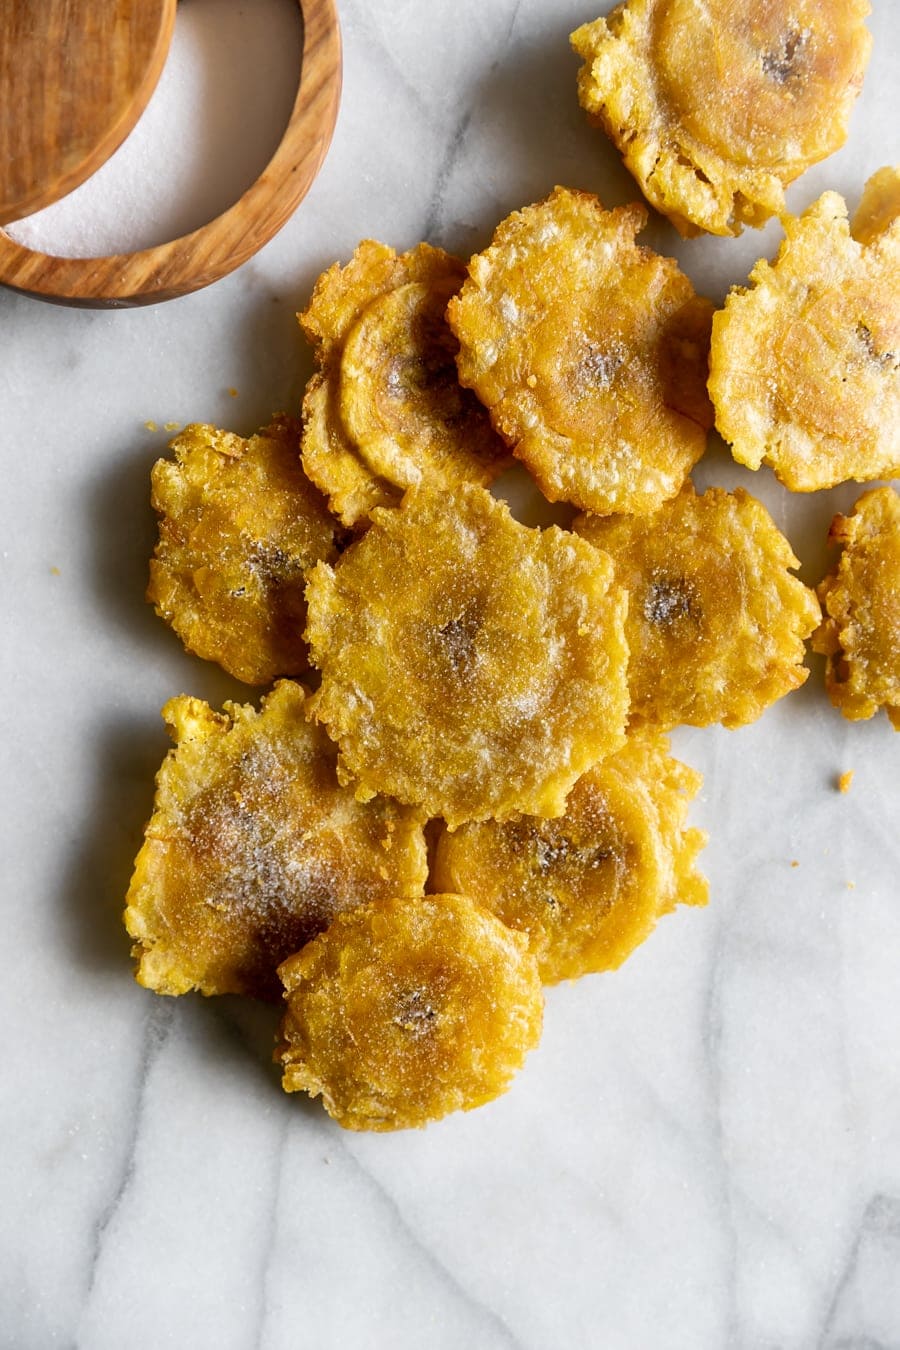 How To Make Tostones (Twice-Fried Green Plantains) - A Sassy Spoon